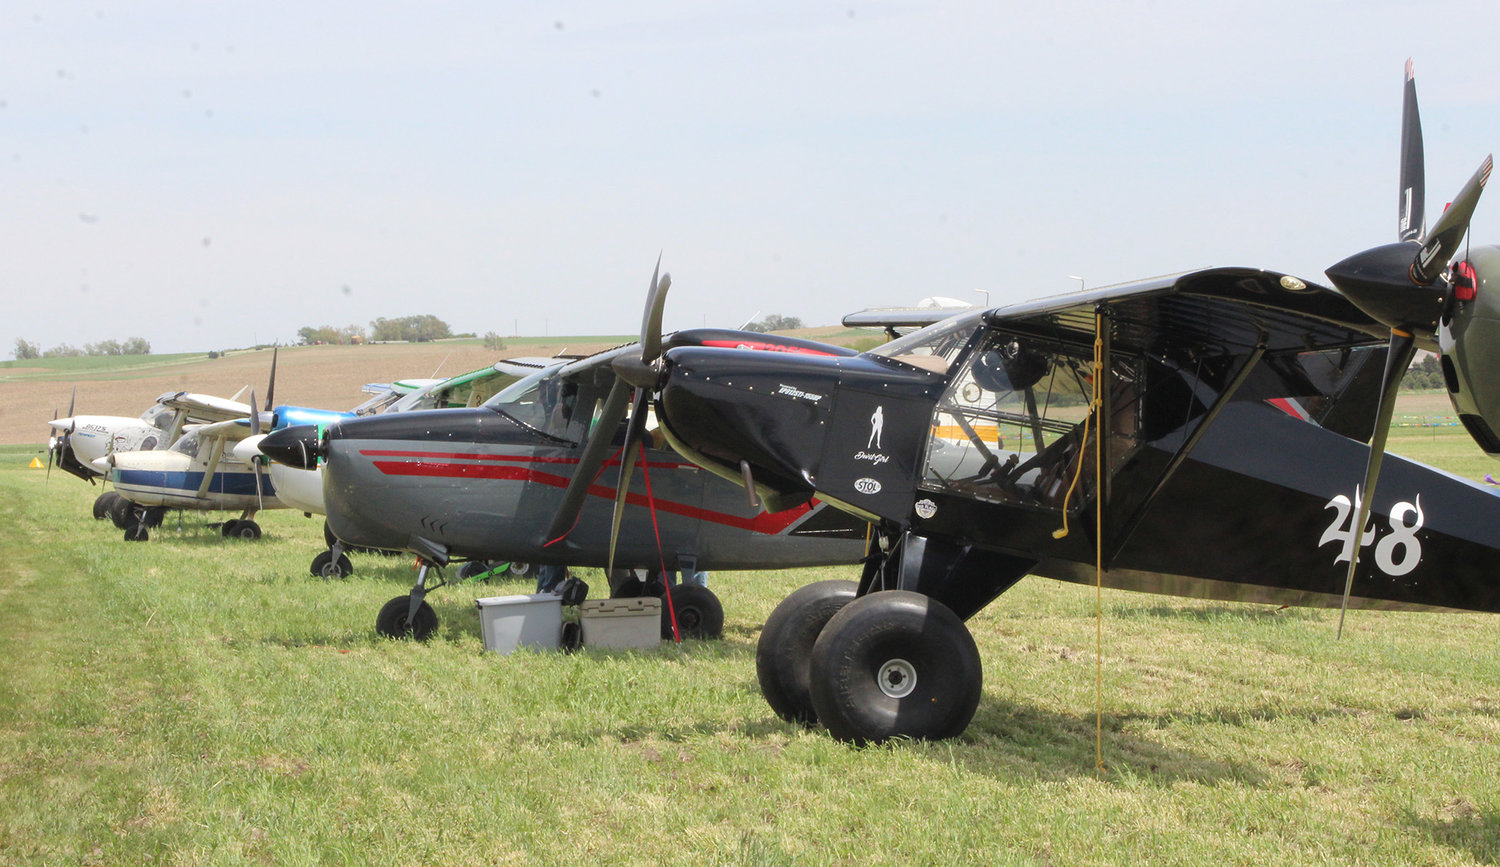 Planes from across the country have converged on Wayne for the second annual MayDay STOL.